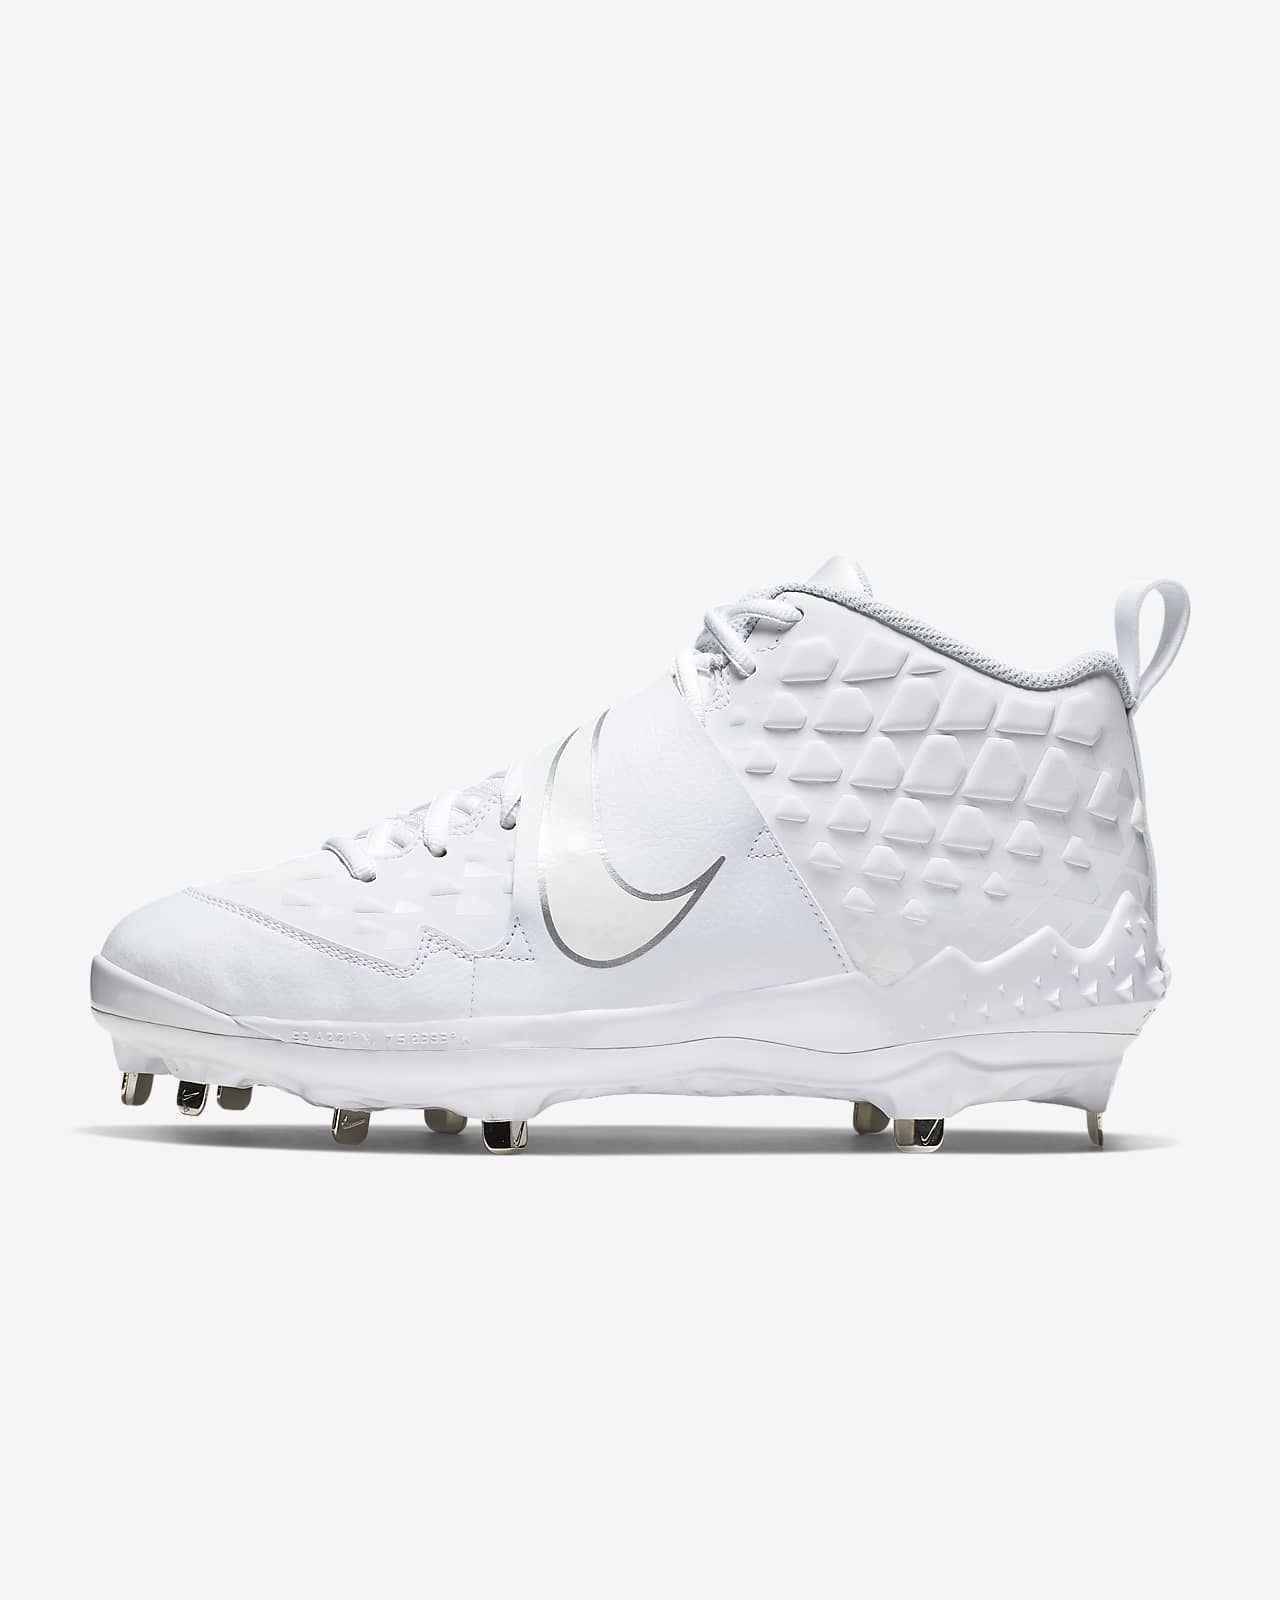 mike trout cleats 2020